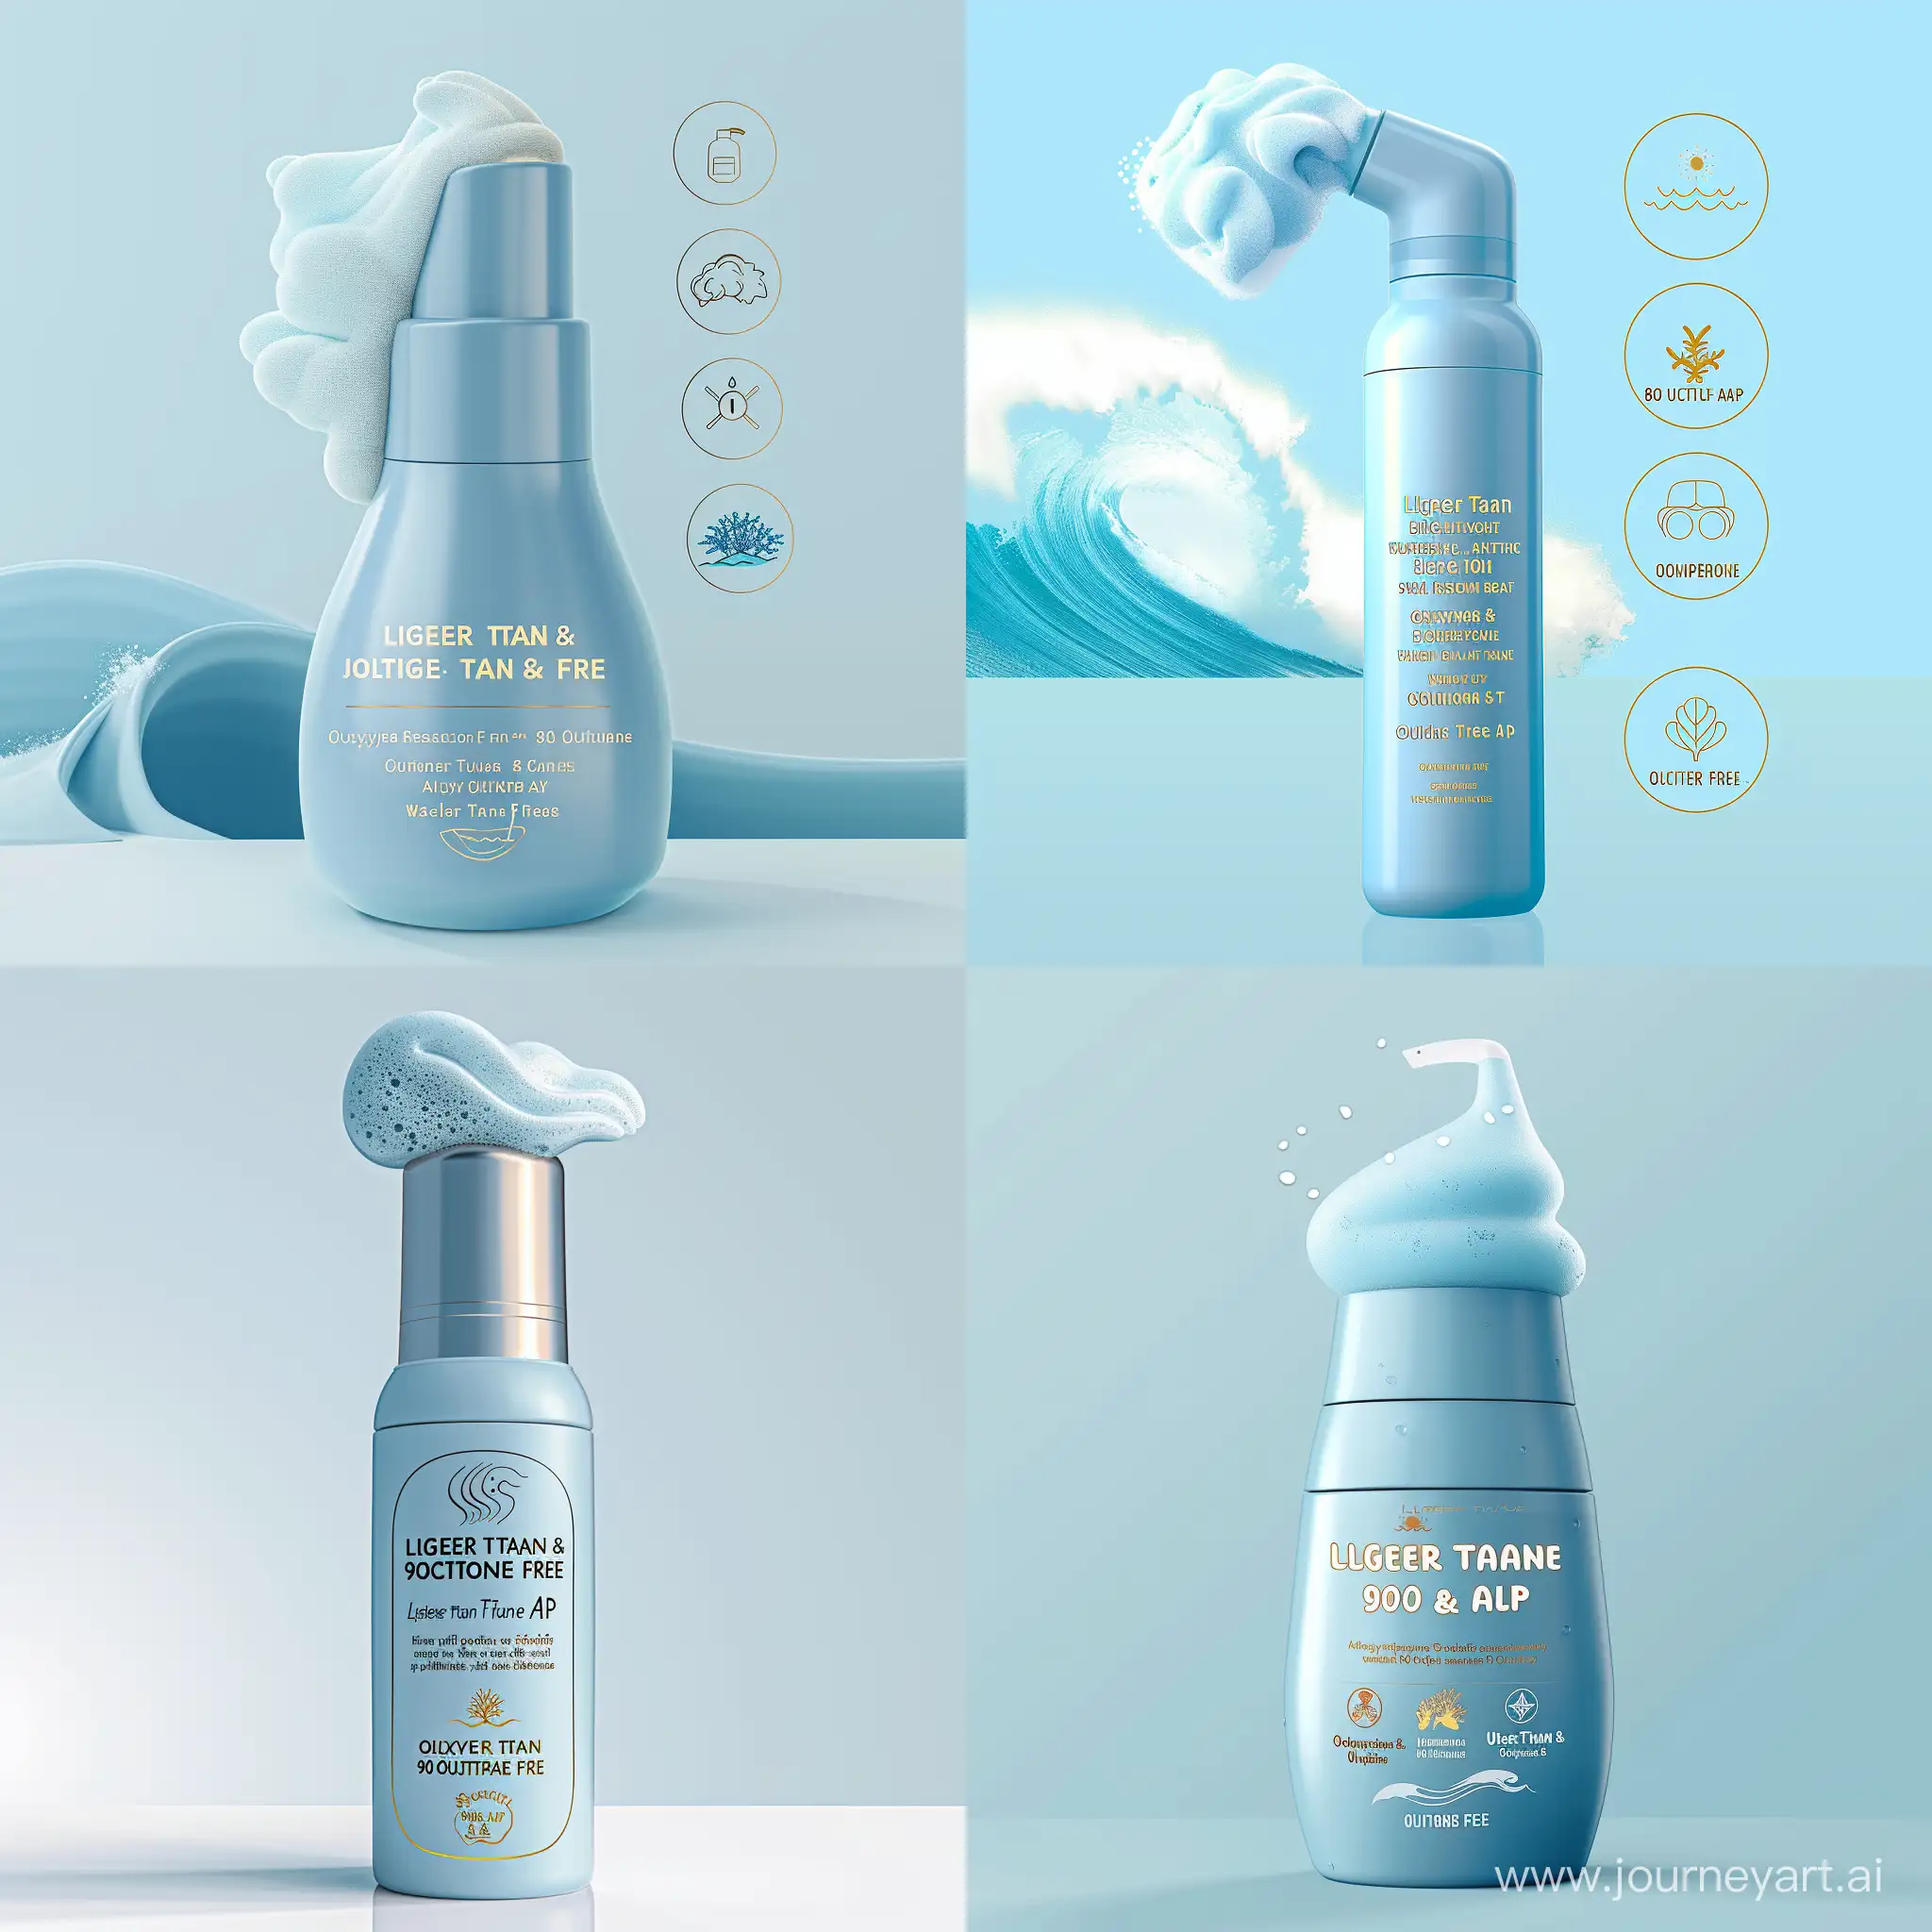 Luxurious-Baby-Blue-Sunscreen-Bottle-with-Gold-Labels-and-EcoFriendly-Symbols